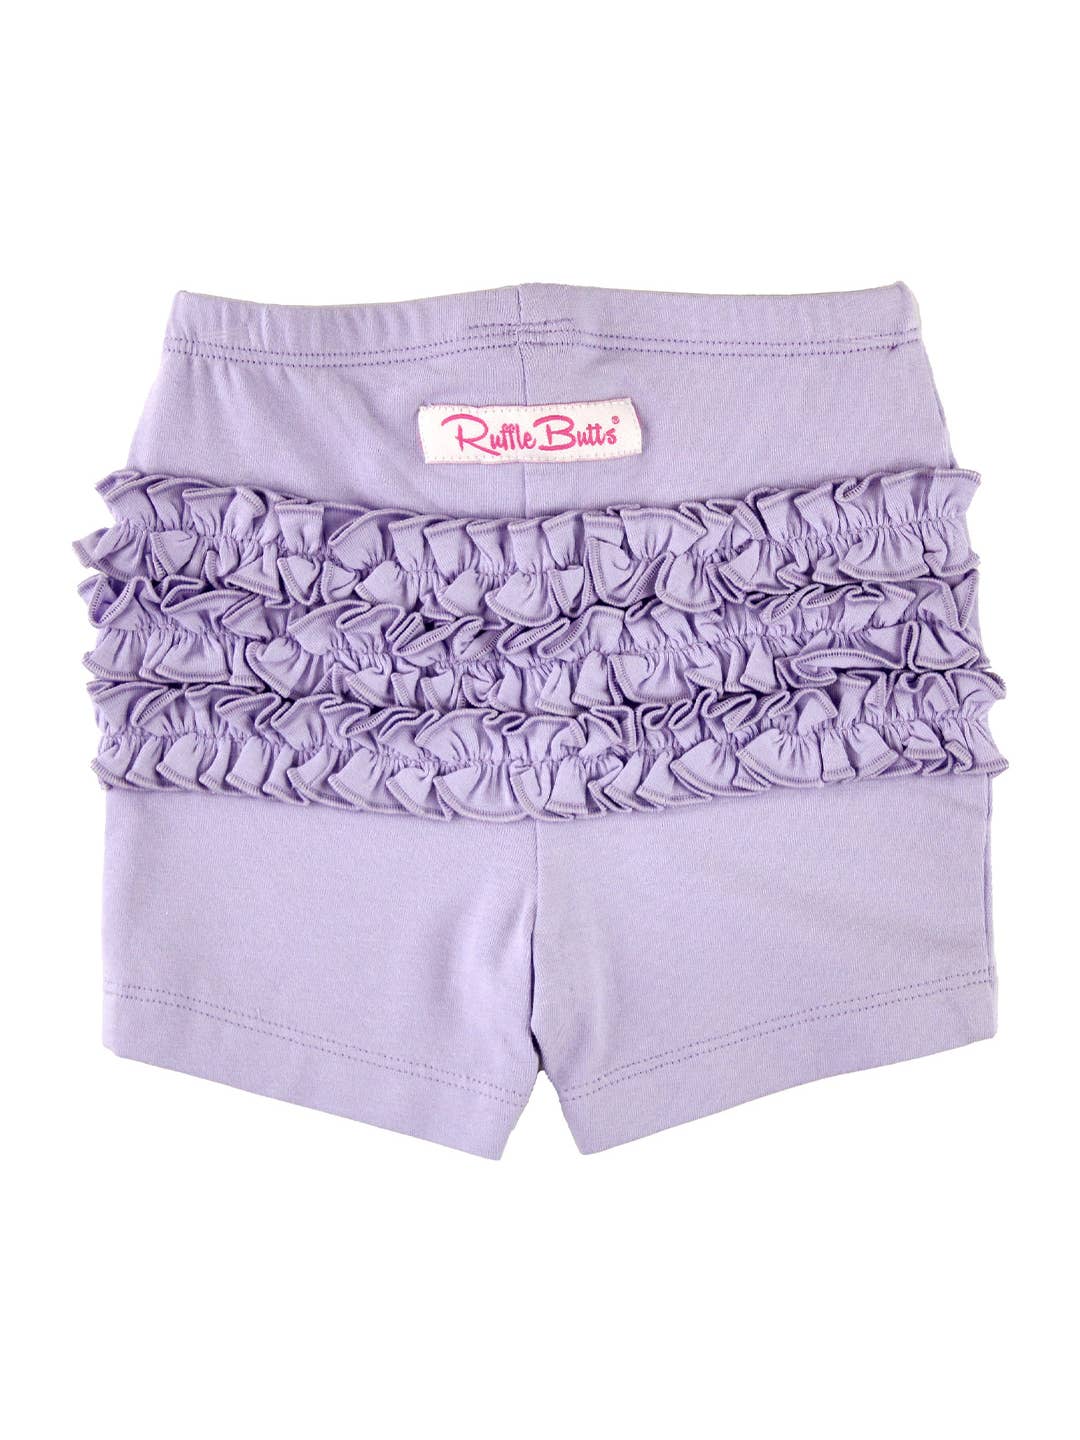 Soolive Bloomies, Girls Bloomers, Undercovers, Sport Shorts, Playground  Pants, Leggings, Under Shorts 